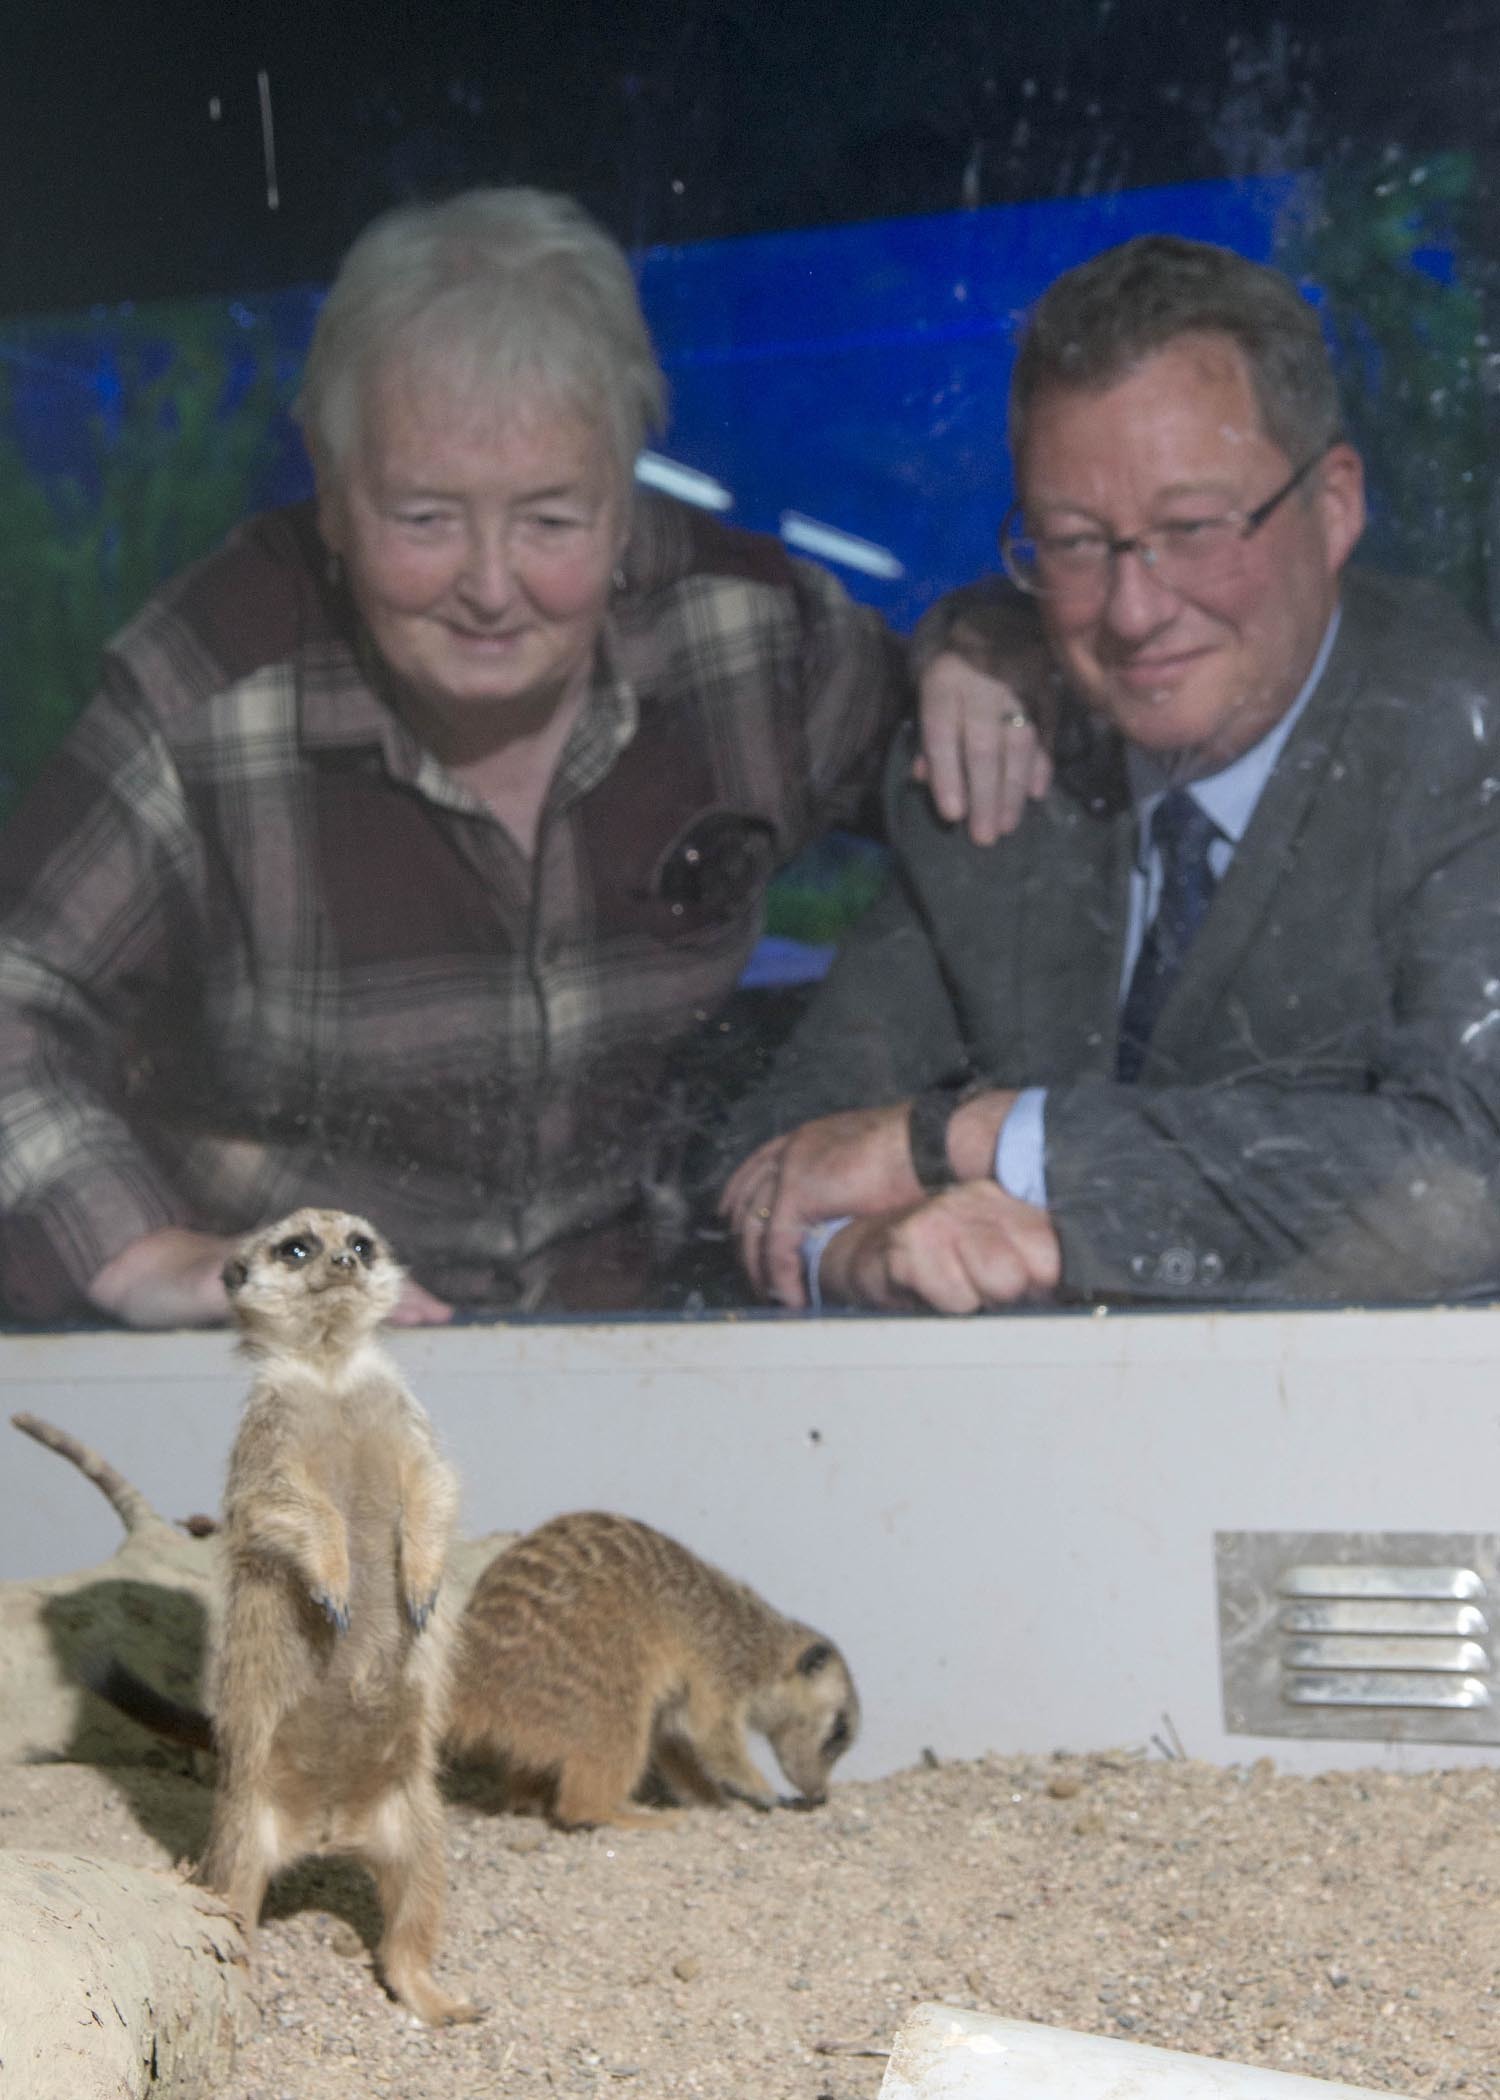 Councillor Yvonne Allan and Donald Shaw, of Friends of Hazlehead Park, visit the baby meerkats.